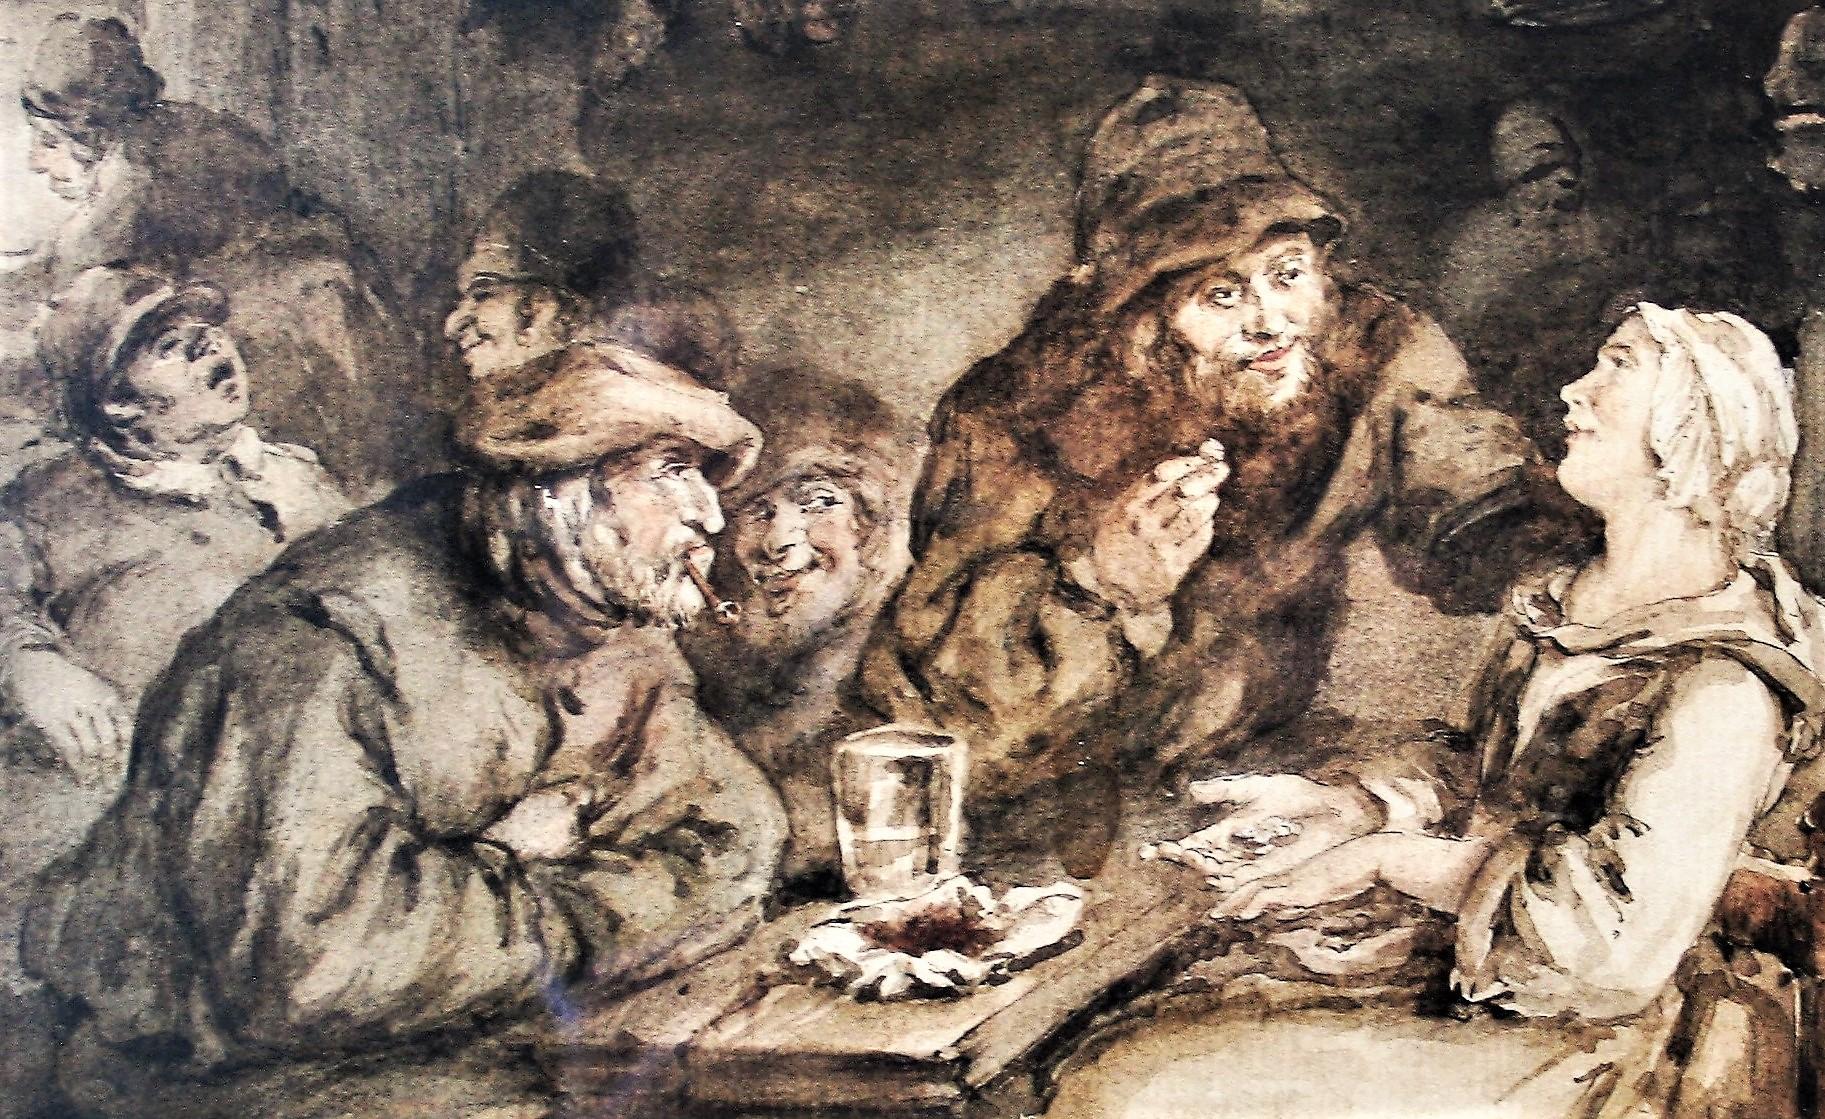 Beautiful ink wash drawing of the Flemish school of a tavern scene. It depicts the interior of a tavern, a place where people gathered to eat and drink. In the foreground are two men and a woman around a table, presumably trying to curry favor. A